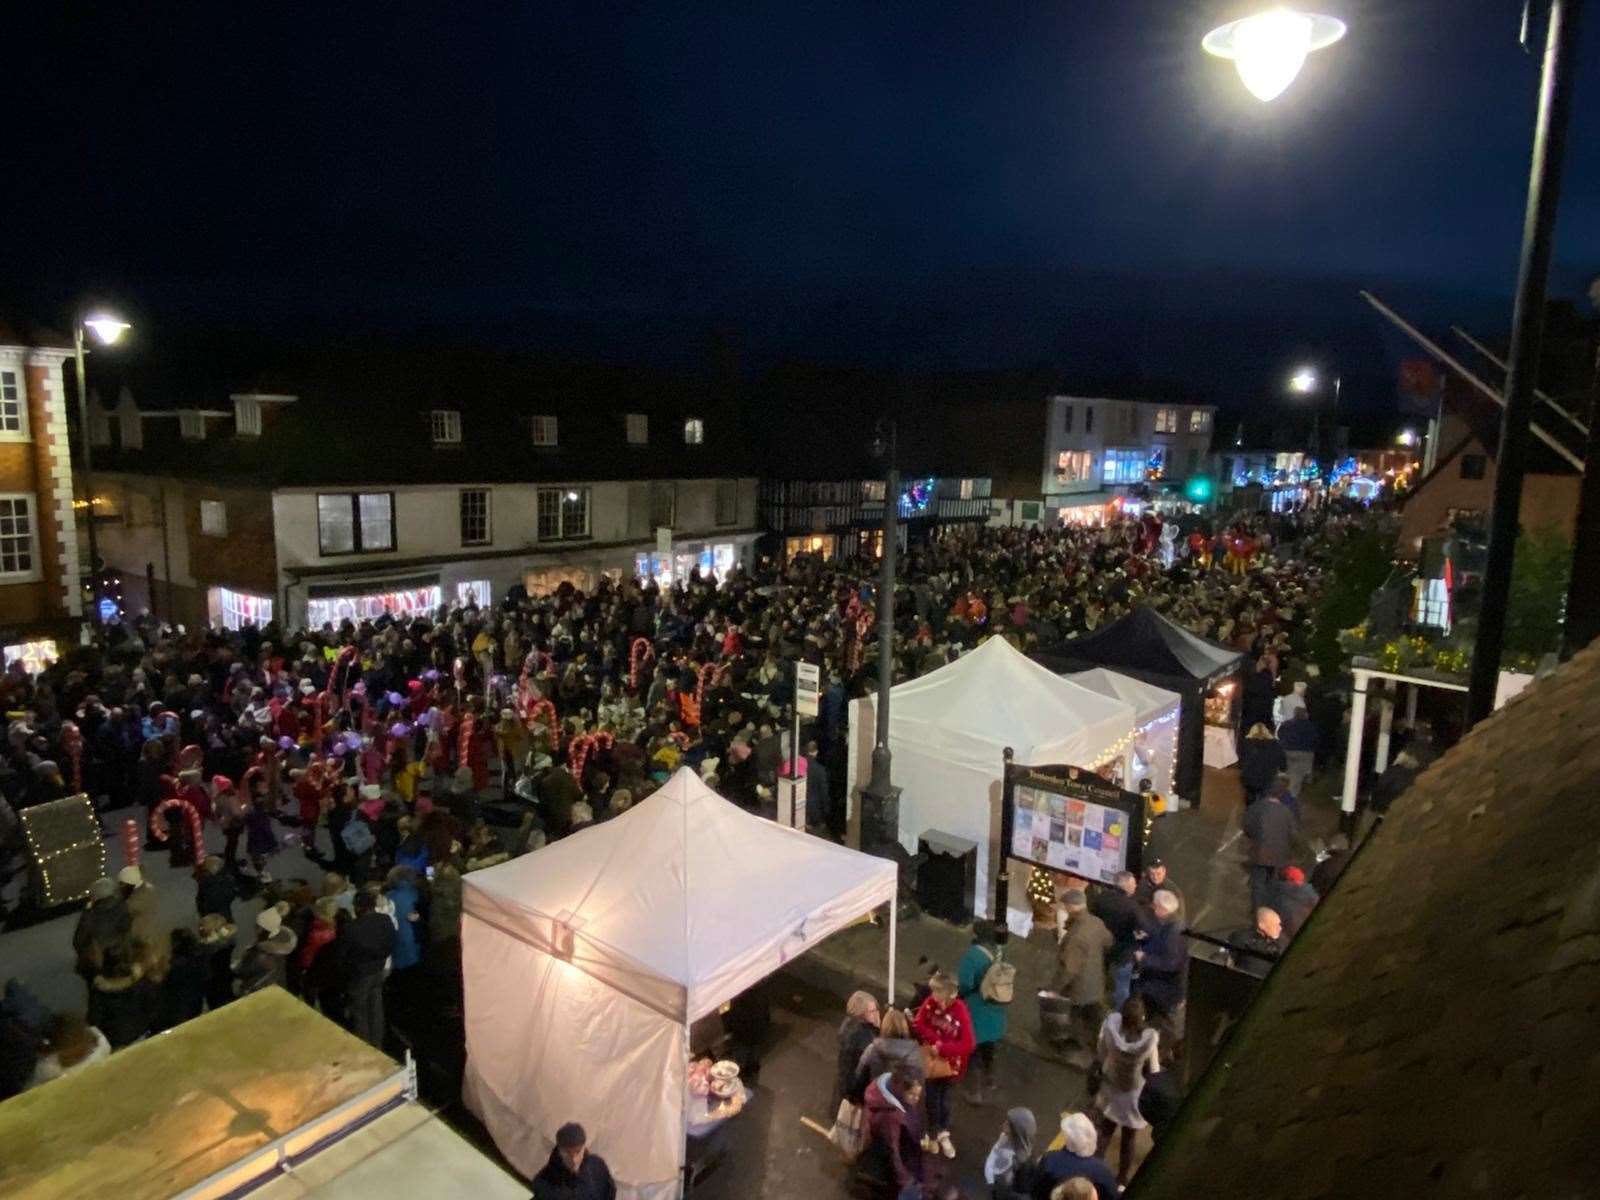 Crowds at the Tenterden Christmas market last year